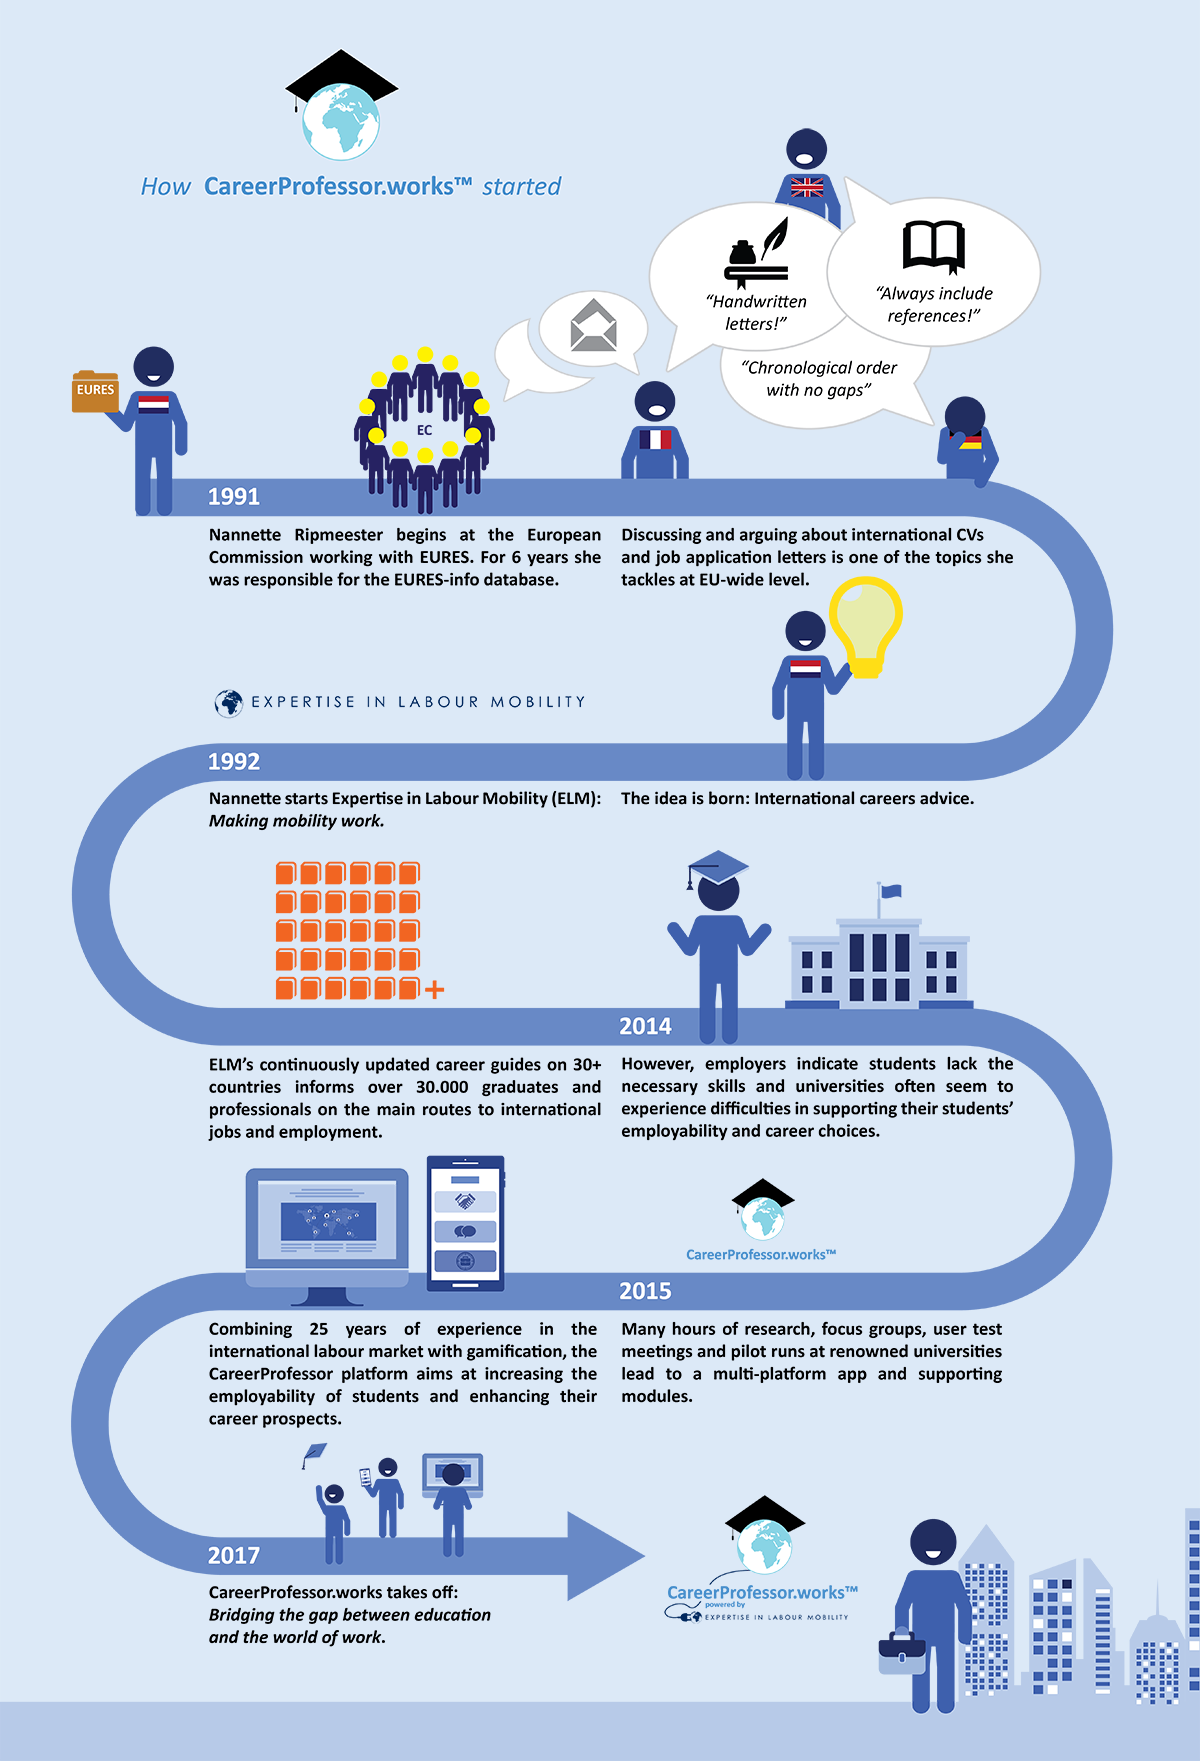 The Story of CareerProfessor - from the European Commission EURES project to Bridging the Gap between Education and the World of Work thru an app. (Infographic)